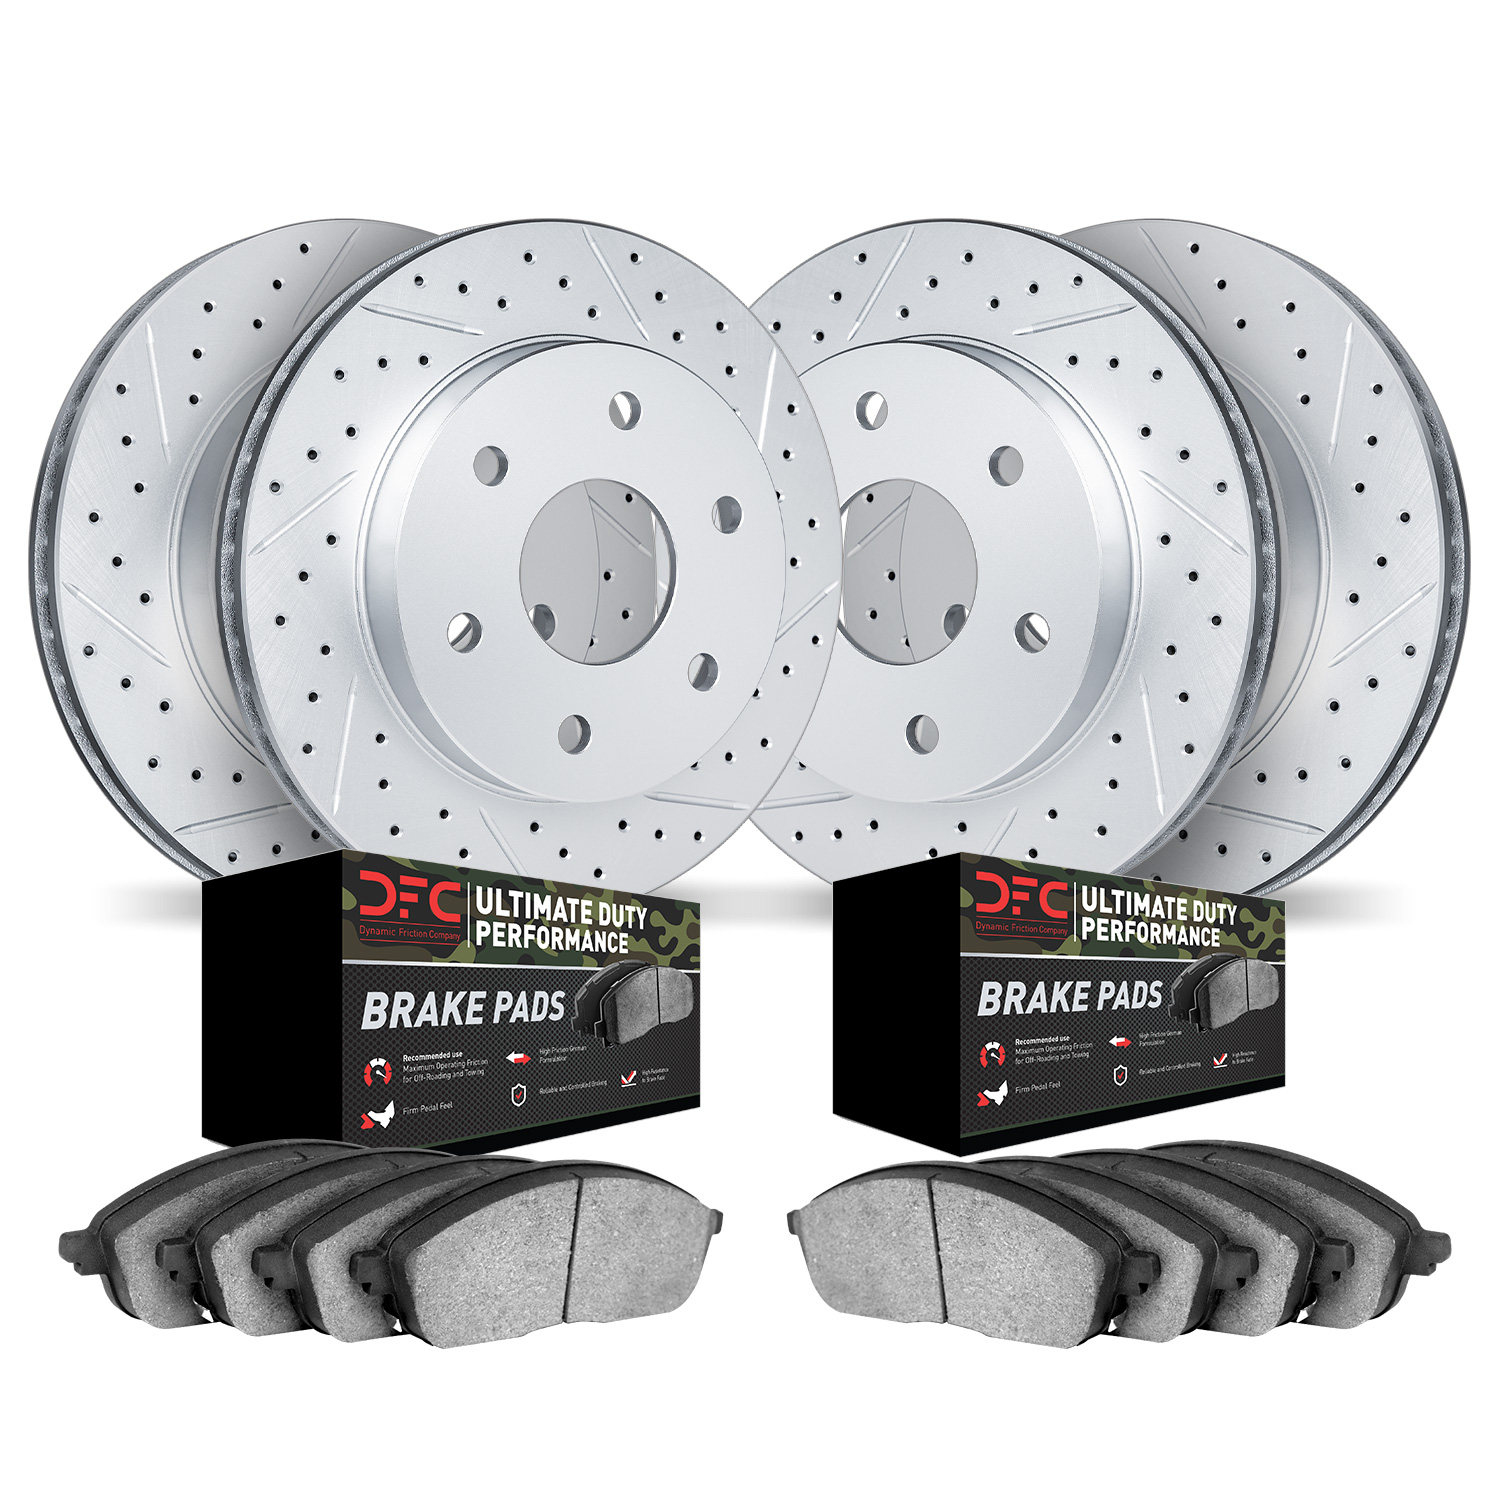 2404-54042 Geoperformance Drilled/Slotted Brake Rotors with Ultimate-Duty Brake Pads Kit, 2018-2021 Ford/Lincoln/Mercury/Mazda,